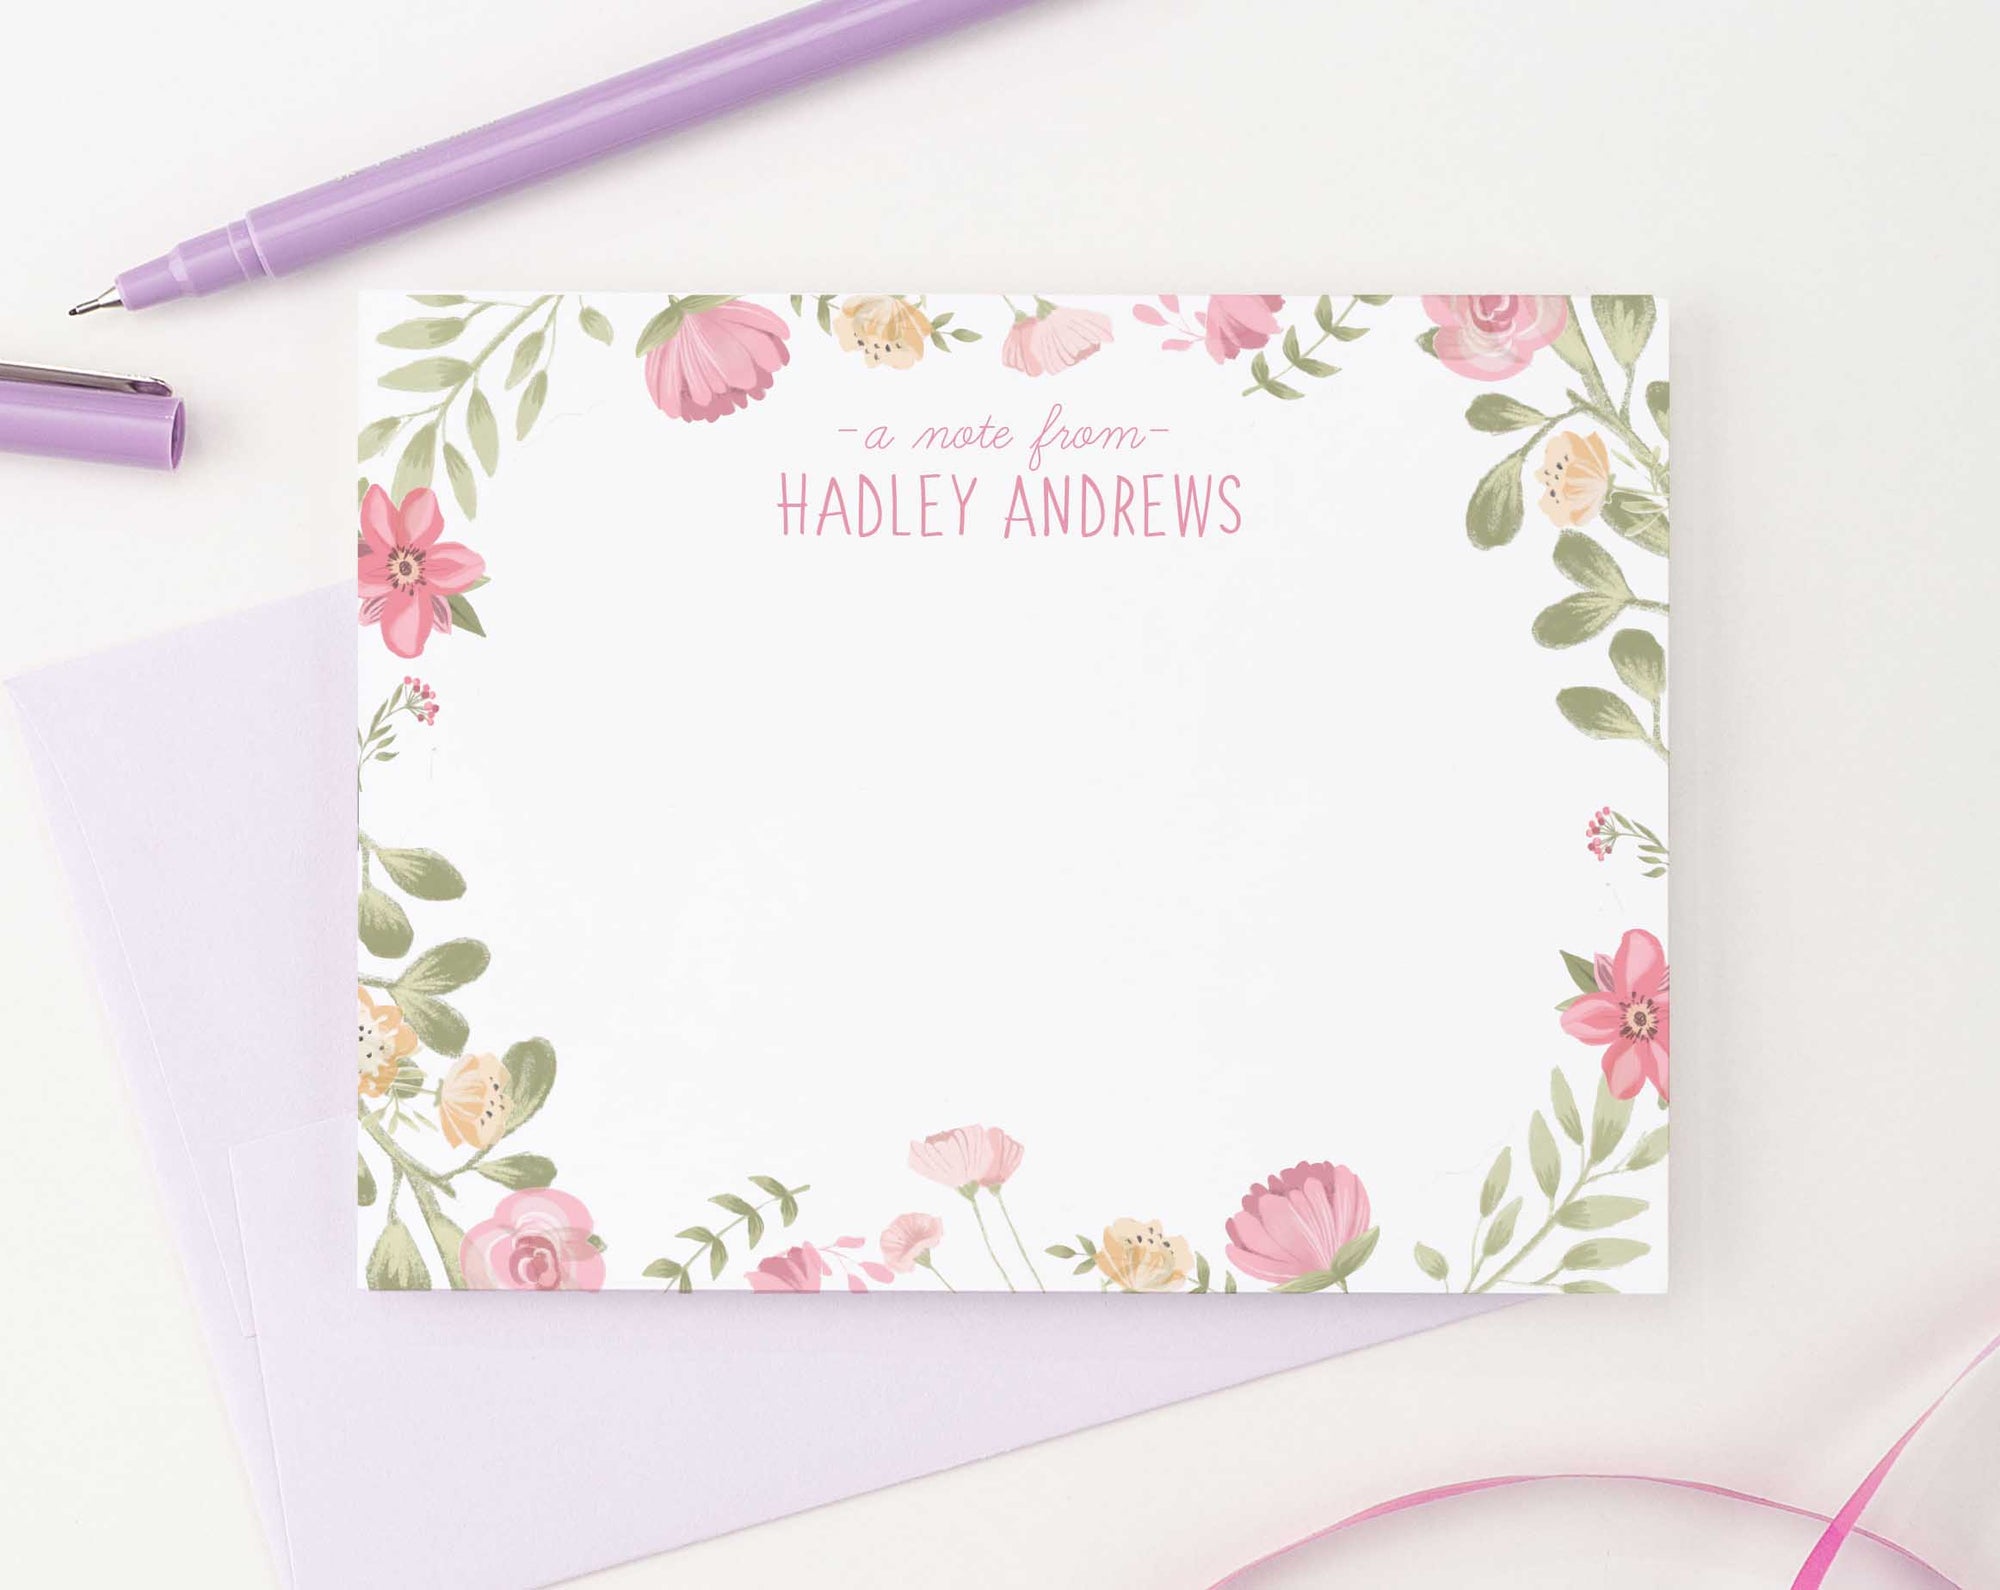 KS133 watercolor floral personalized stationery set a note from girls flowers cute sweet 2